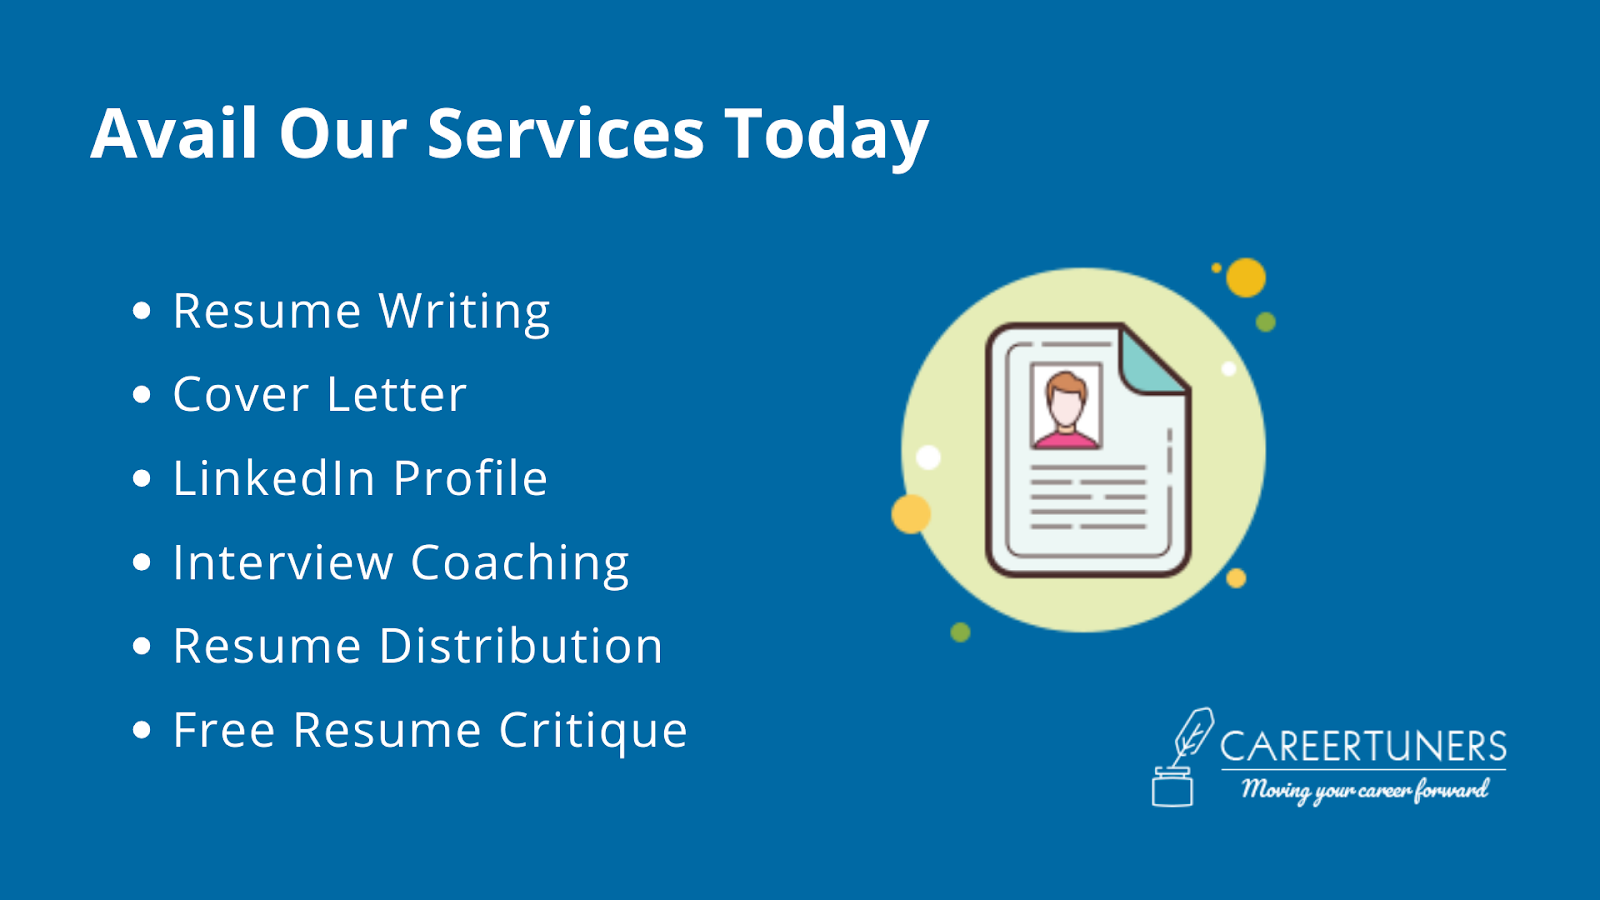 Avail Our Services Today and make your resume ATS-Compatible.

- Resume Writing
- Cover Letter
- LinkedIn Profile
- Interview Coaching
- Resume Distribution